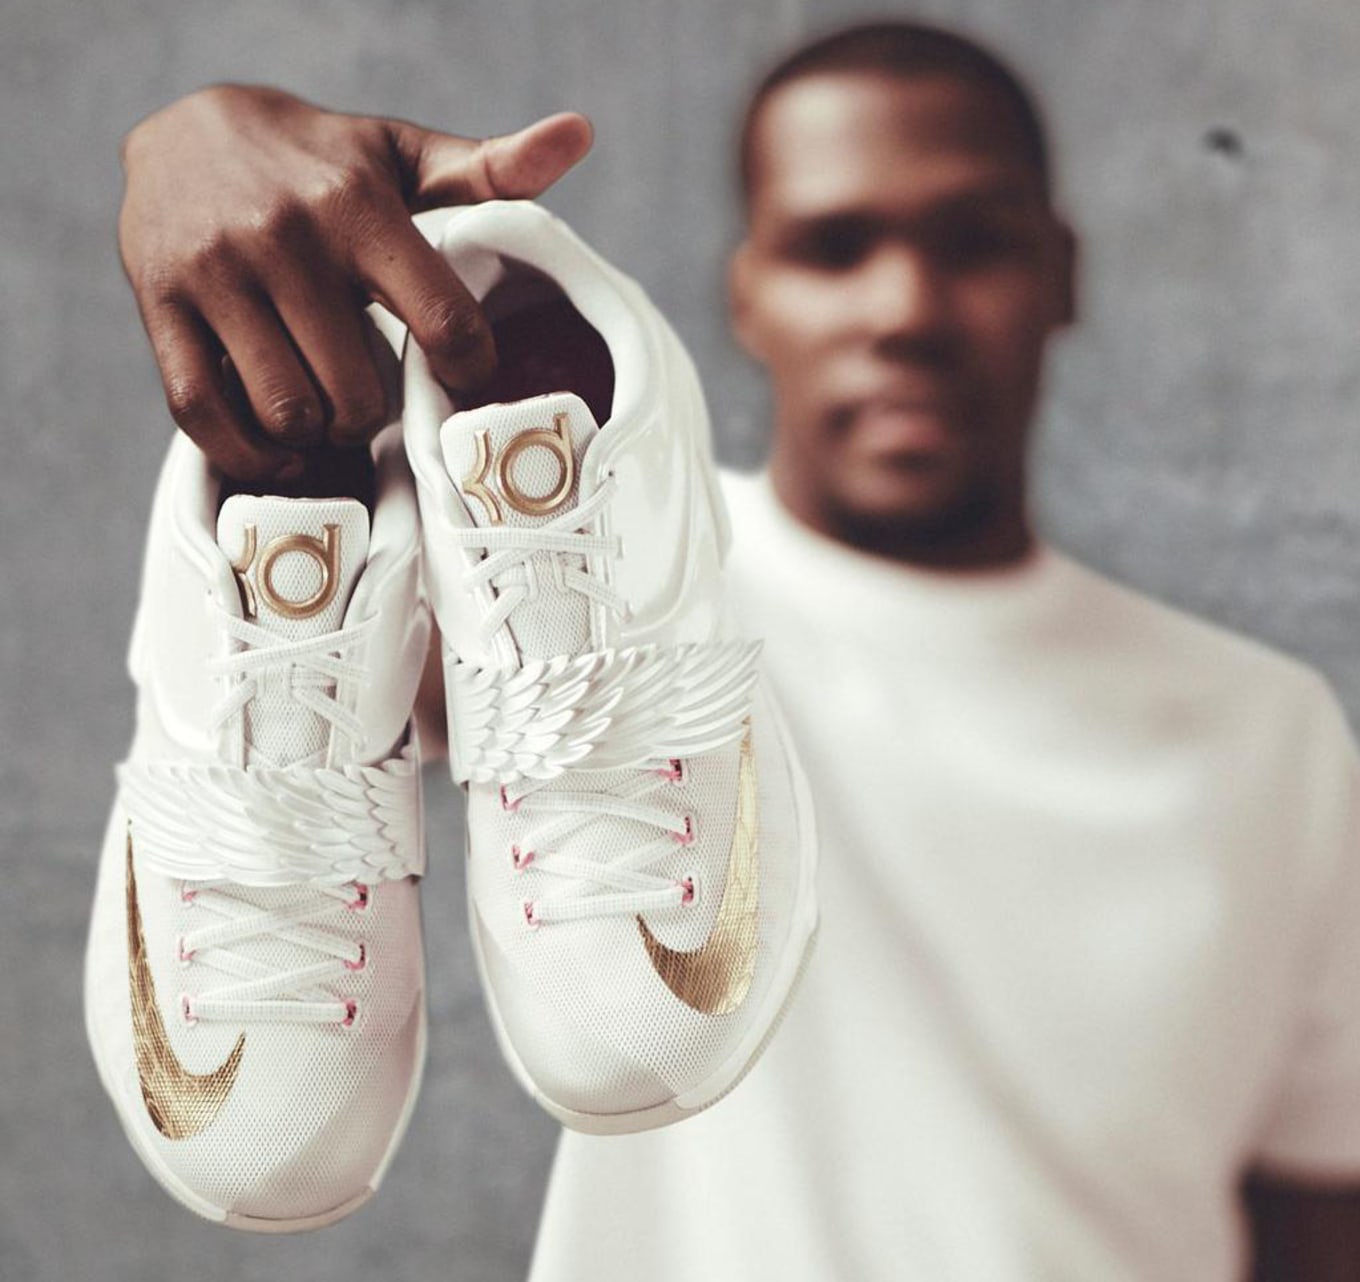 kd aunt pearl 3